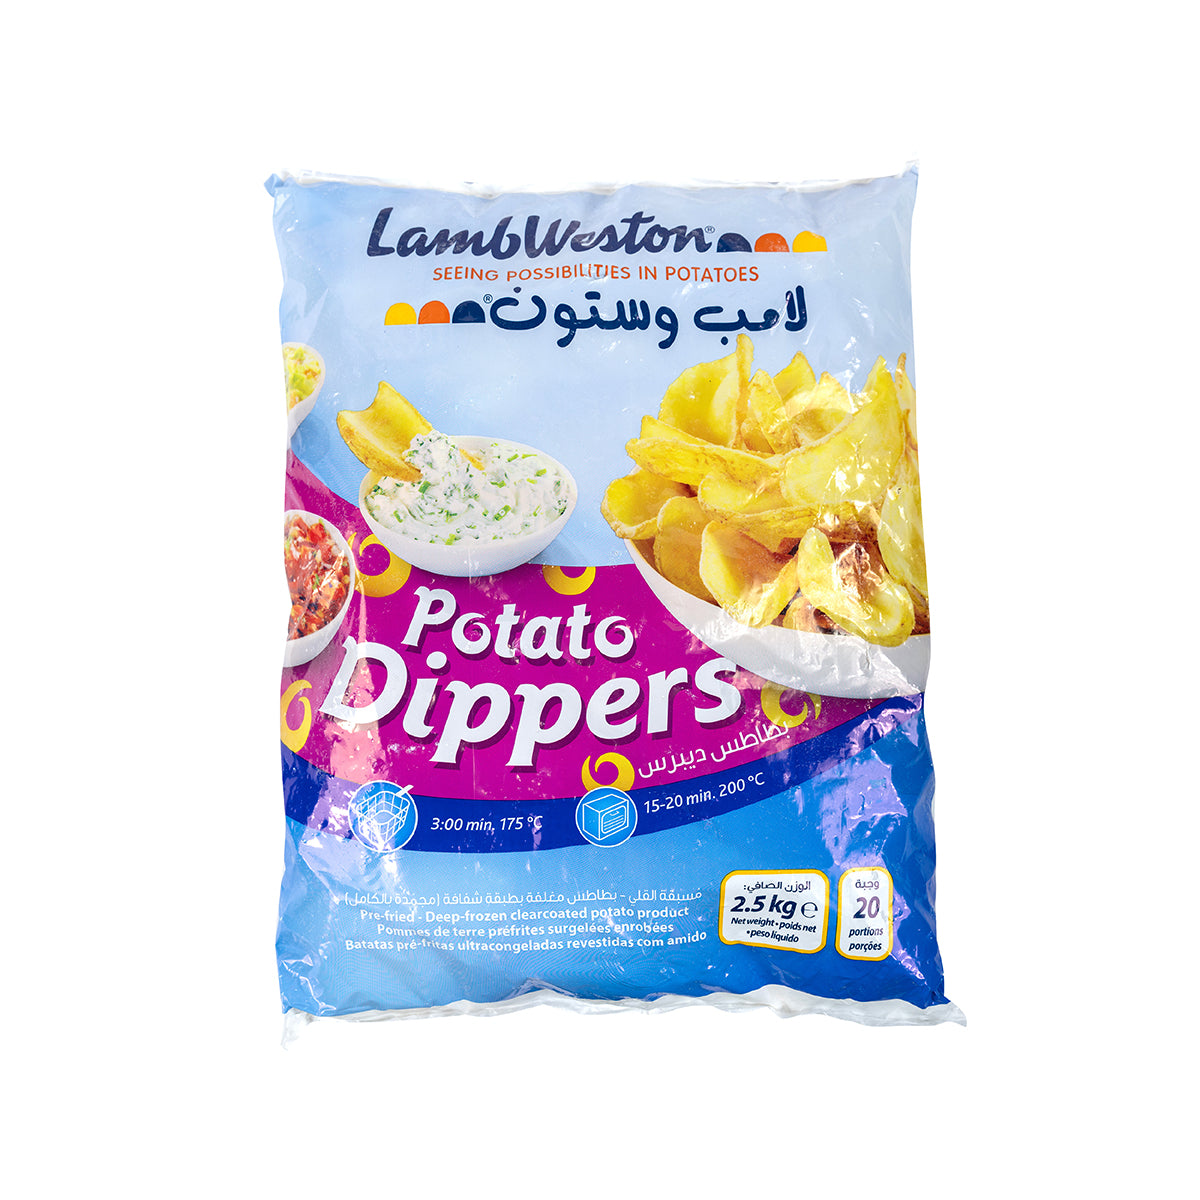 Potato Dippers Skin On, Thin 2.5kg